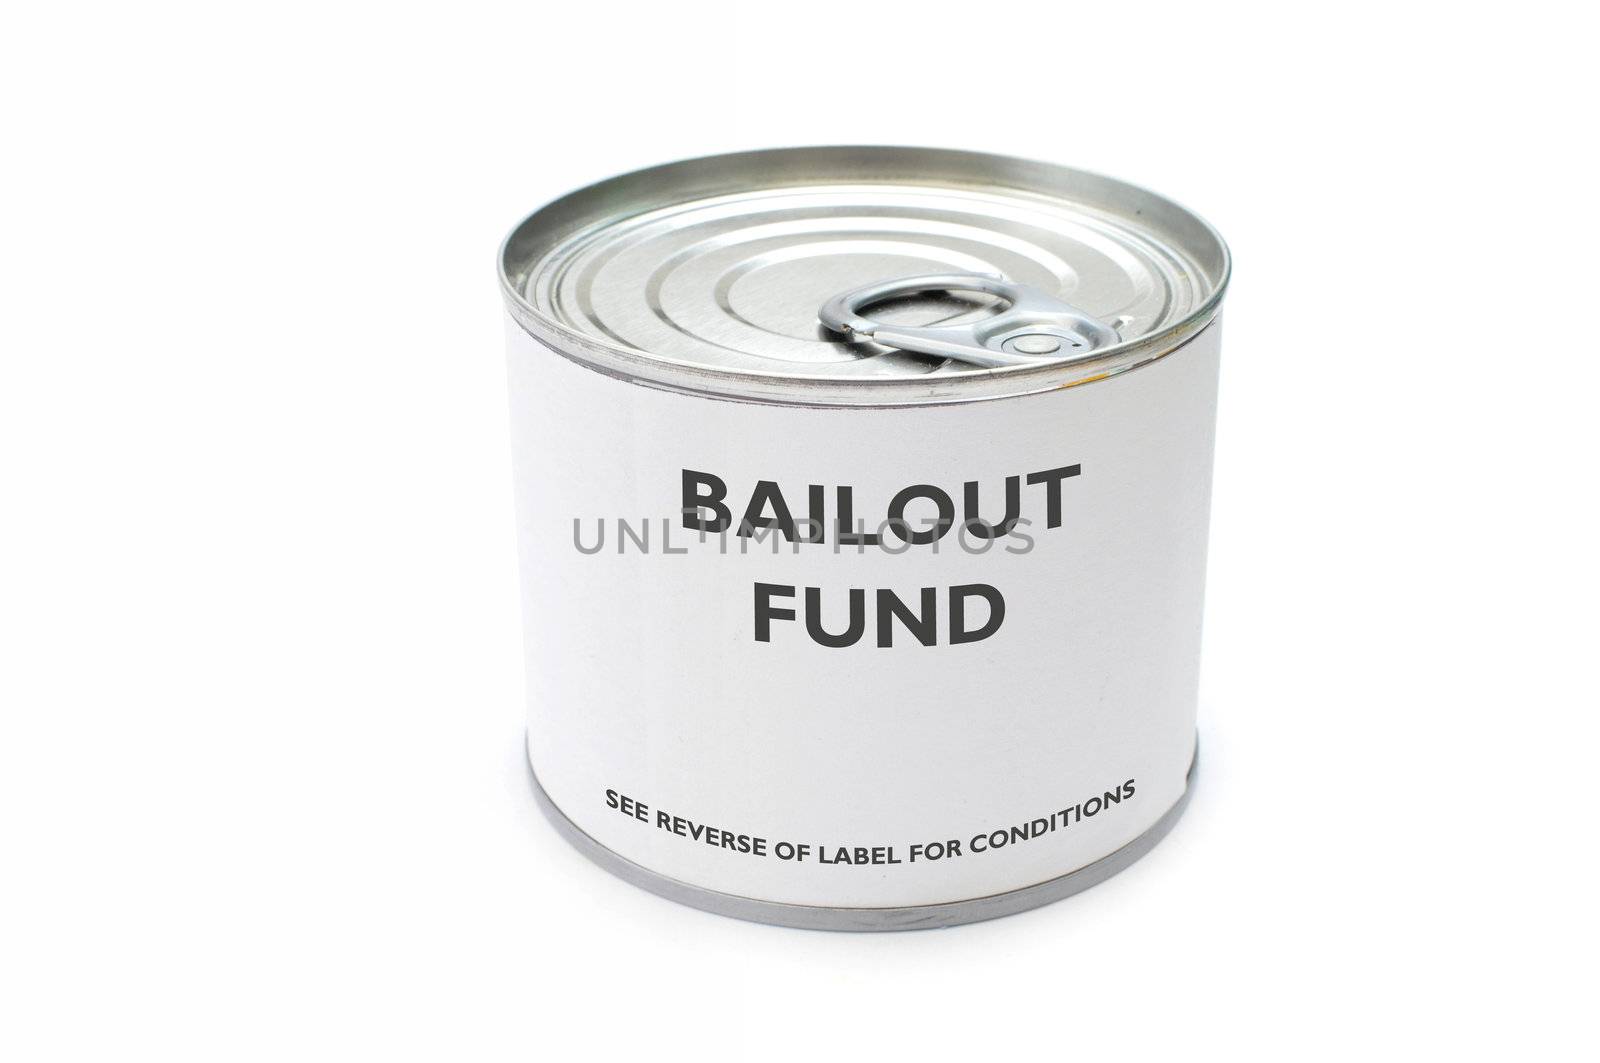 Tin can labelled as a bailout fund